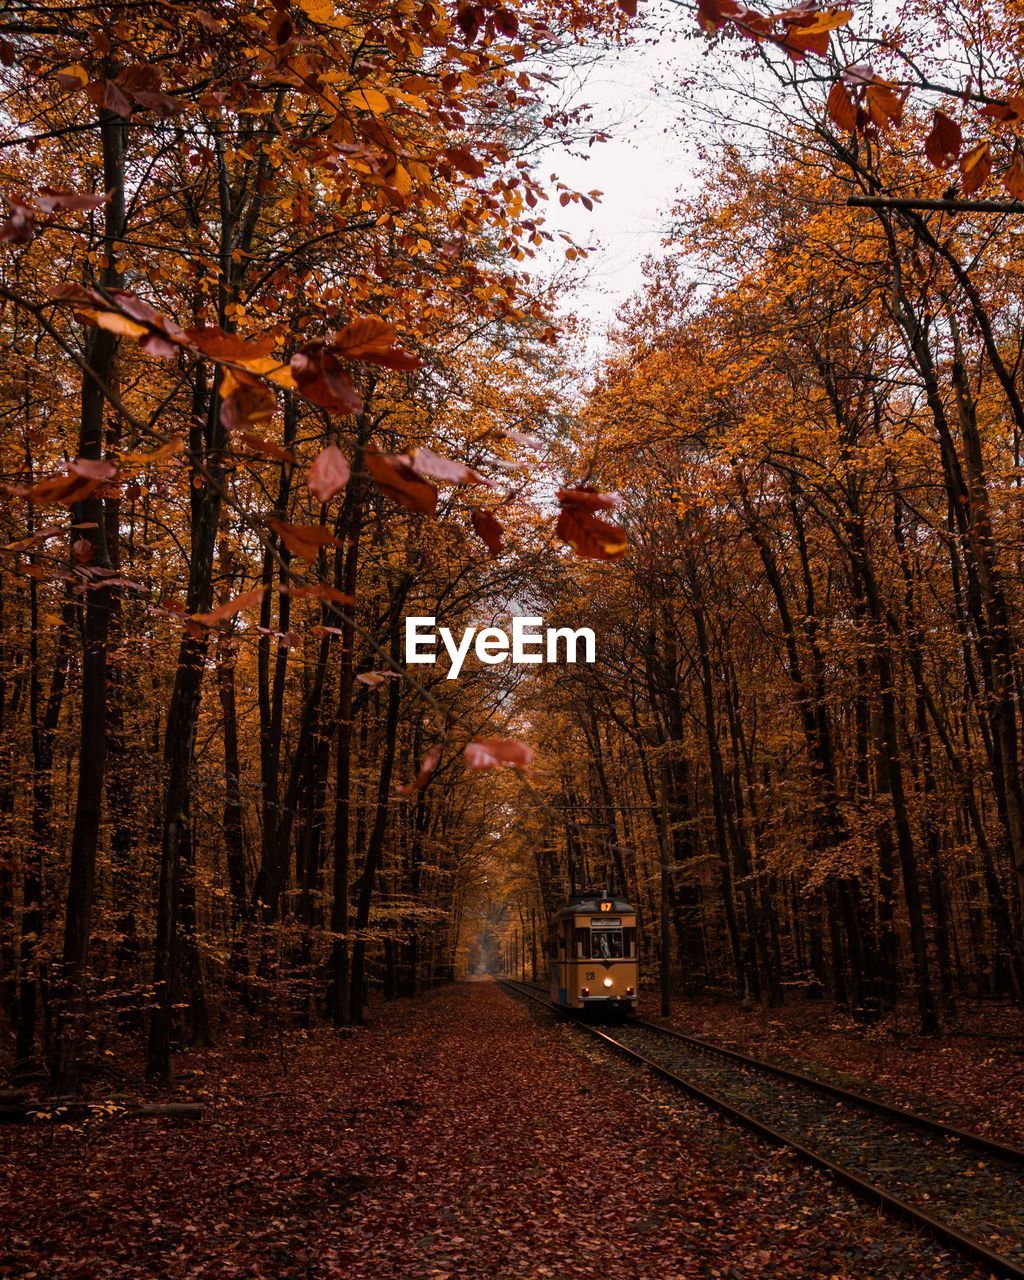 A tram is driving on its moody tram way deep into a dark autum forest